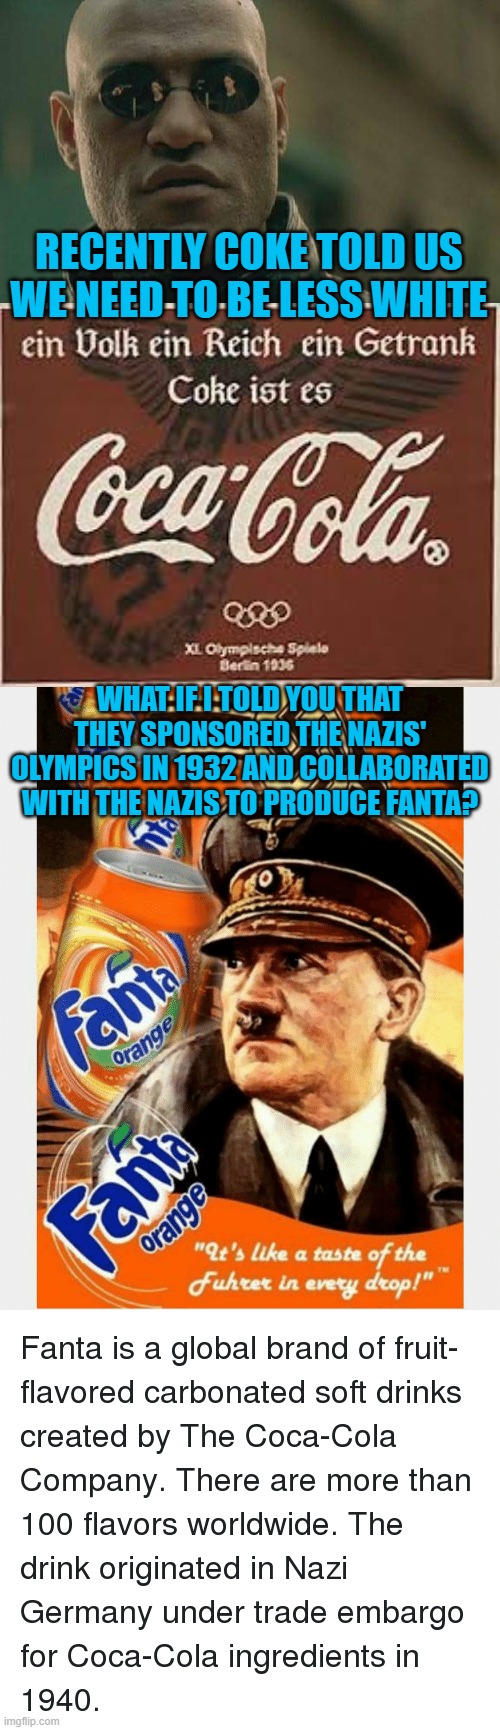 Coke has some splainin to do. | RECENTLY COKE TOLD US WE NEED TO BE LESS WHITE; WHAT IF I TOLD YOU THAT THEY SPONSORED THE NAZIS' OLYMPICS IN 1932 AND COLLABORATED WITH THE NAZIS TO PRODUCE FANTA? | image tagged in memes,matrix morpheus | made w/ Imgflip meme maker